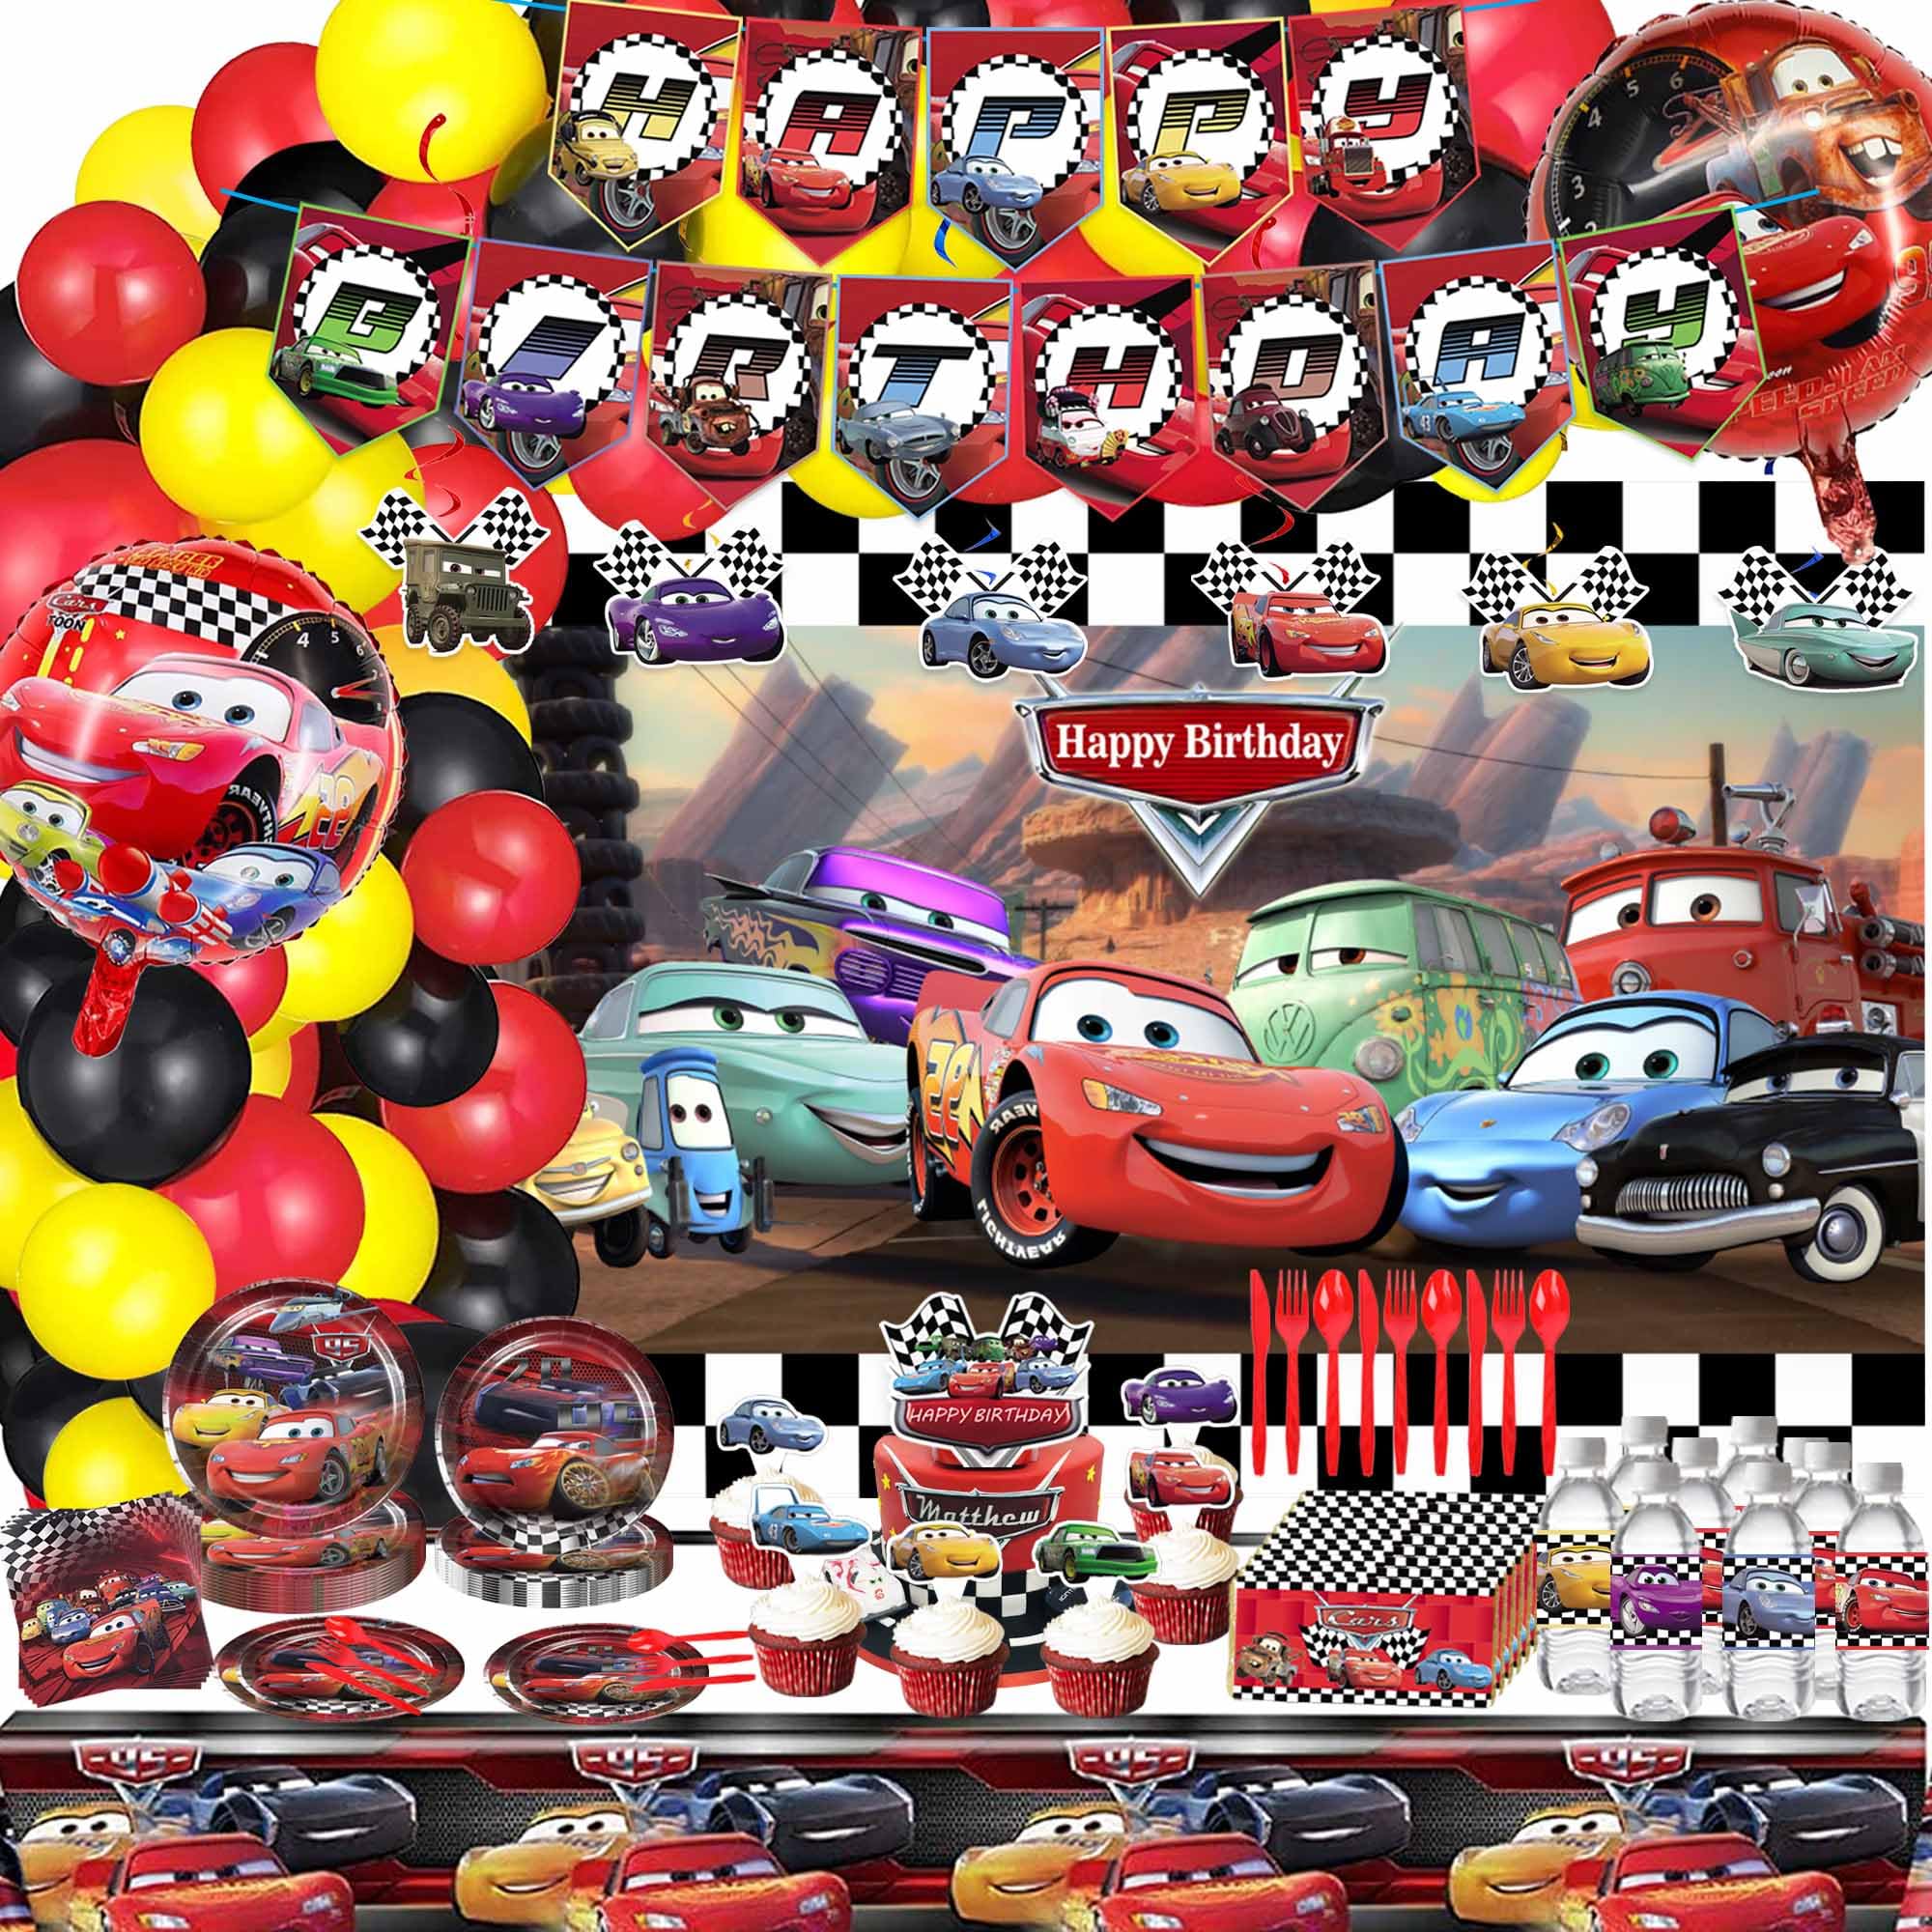 Cars Birthday Party Supplies, Lightning McQueen Birthday Decorations Include Banner, Balloons Arch, Backdrop, Tablecloth, Bottle Labels, Chocolate Stickers, Cupcake Toppers for Cars Theme Party